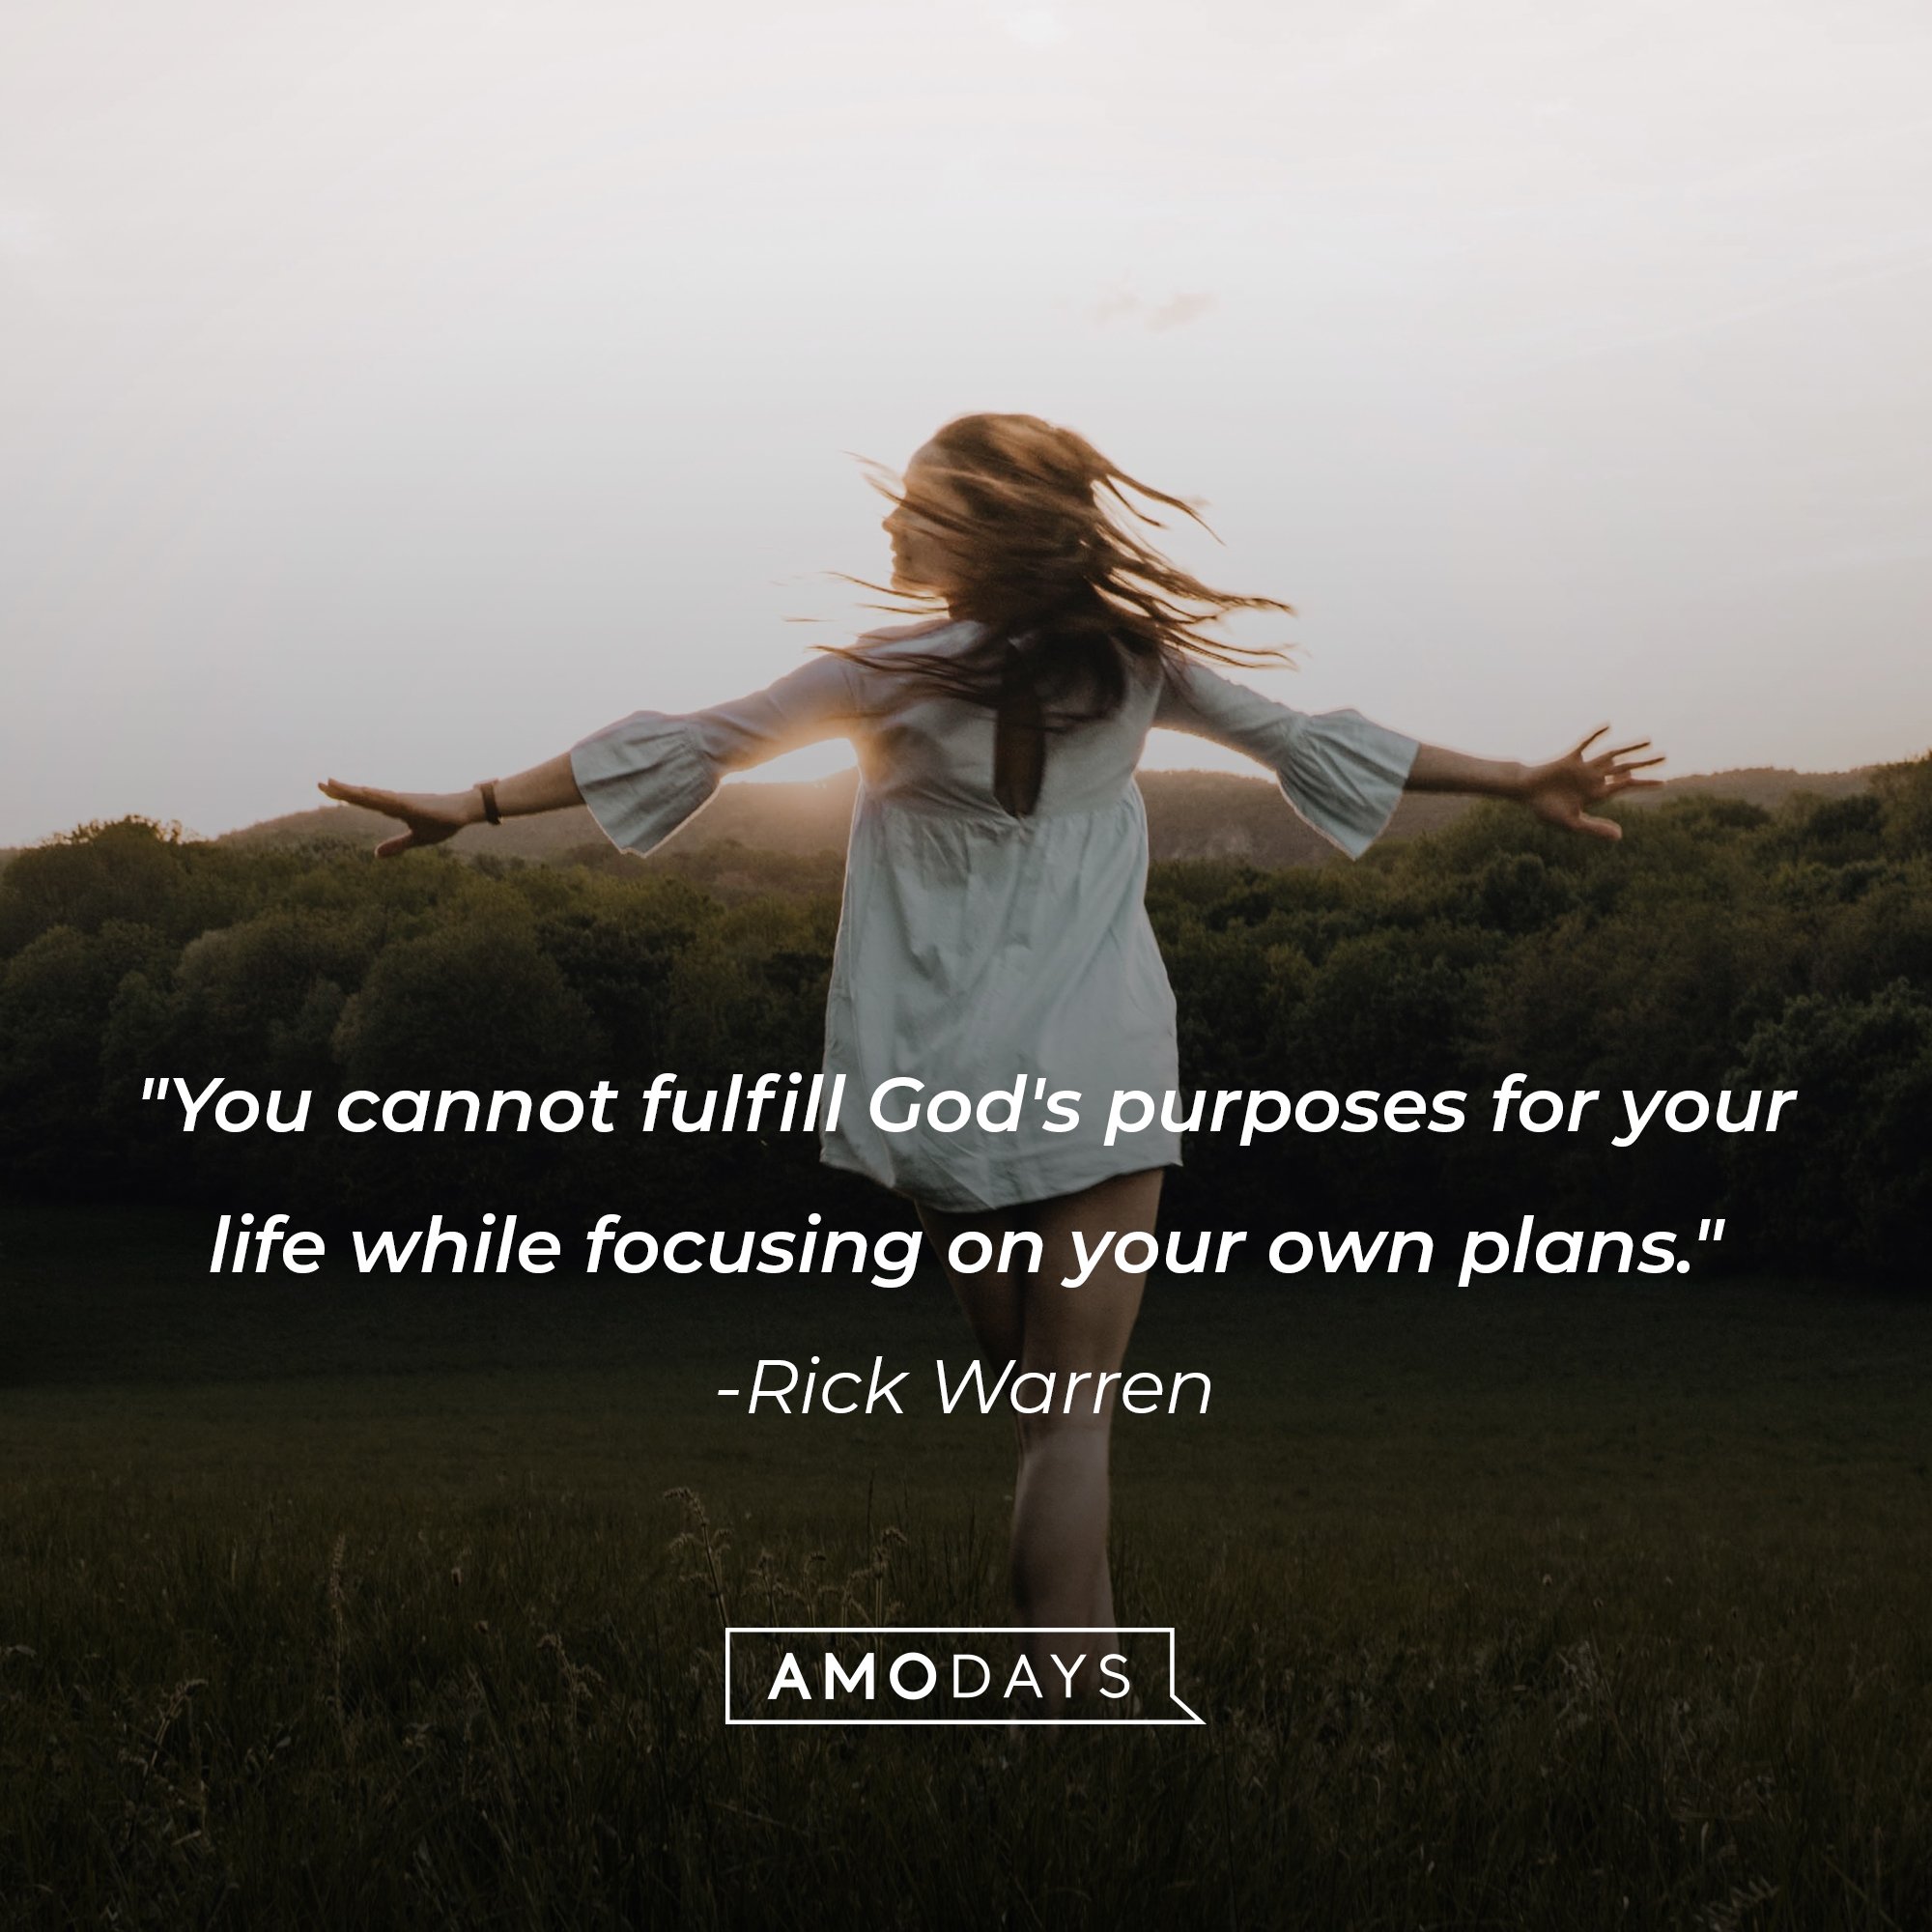 Rick Warren’s quote: "You cannot fulfill God's purposes for your life while focusing on your own plans." | Image: AmoDays 